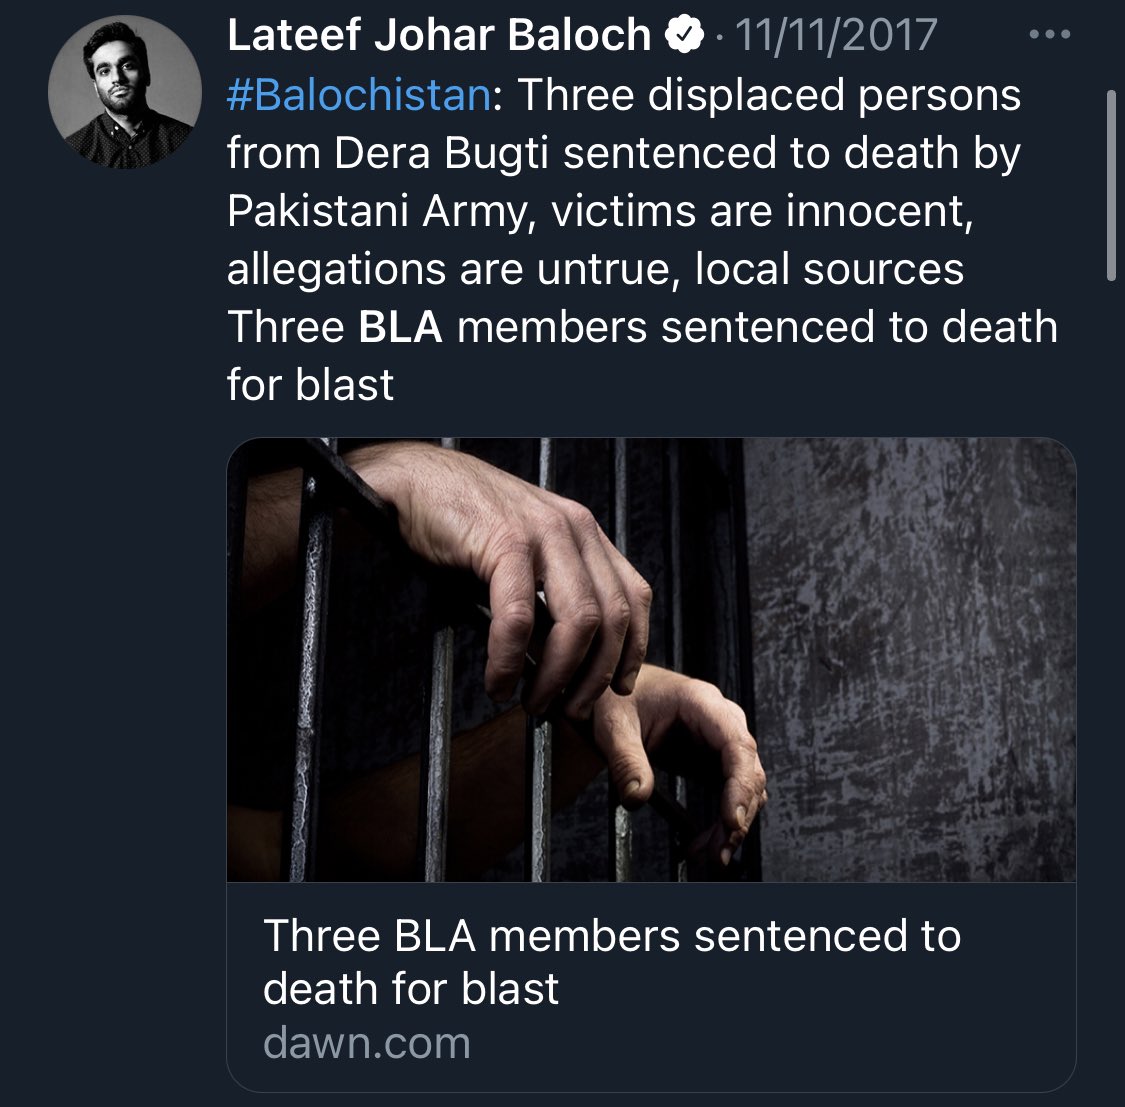 In 2017 Lateef Johar posted in favor of three convicted BLA terrorists for committing a terrorist attack using a bomb blast by calling them “displaced persons” & “victims” & “innocent” when courts of law convicted them for committing terrorism based upon laws of the land./17